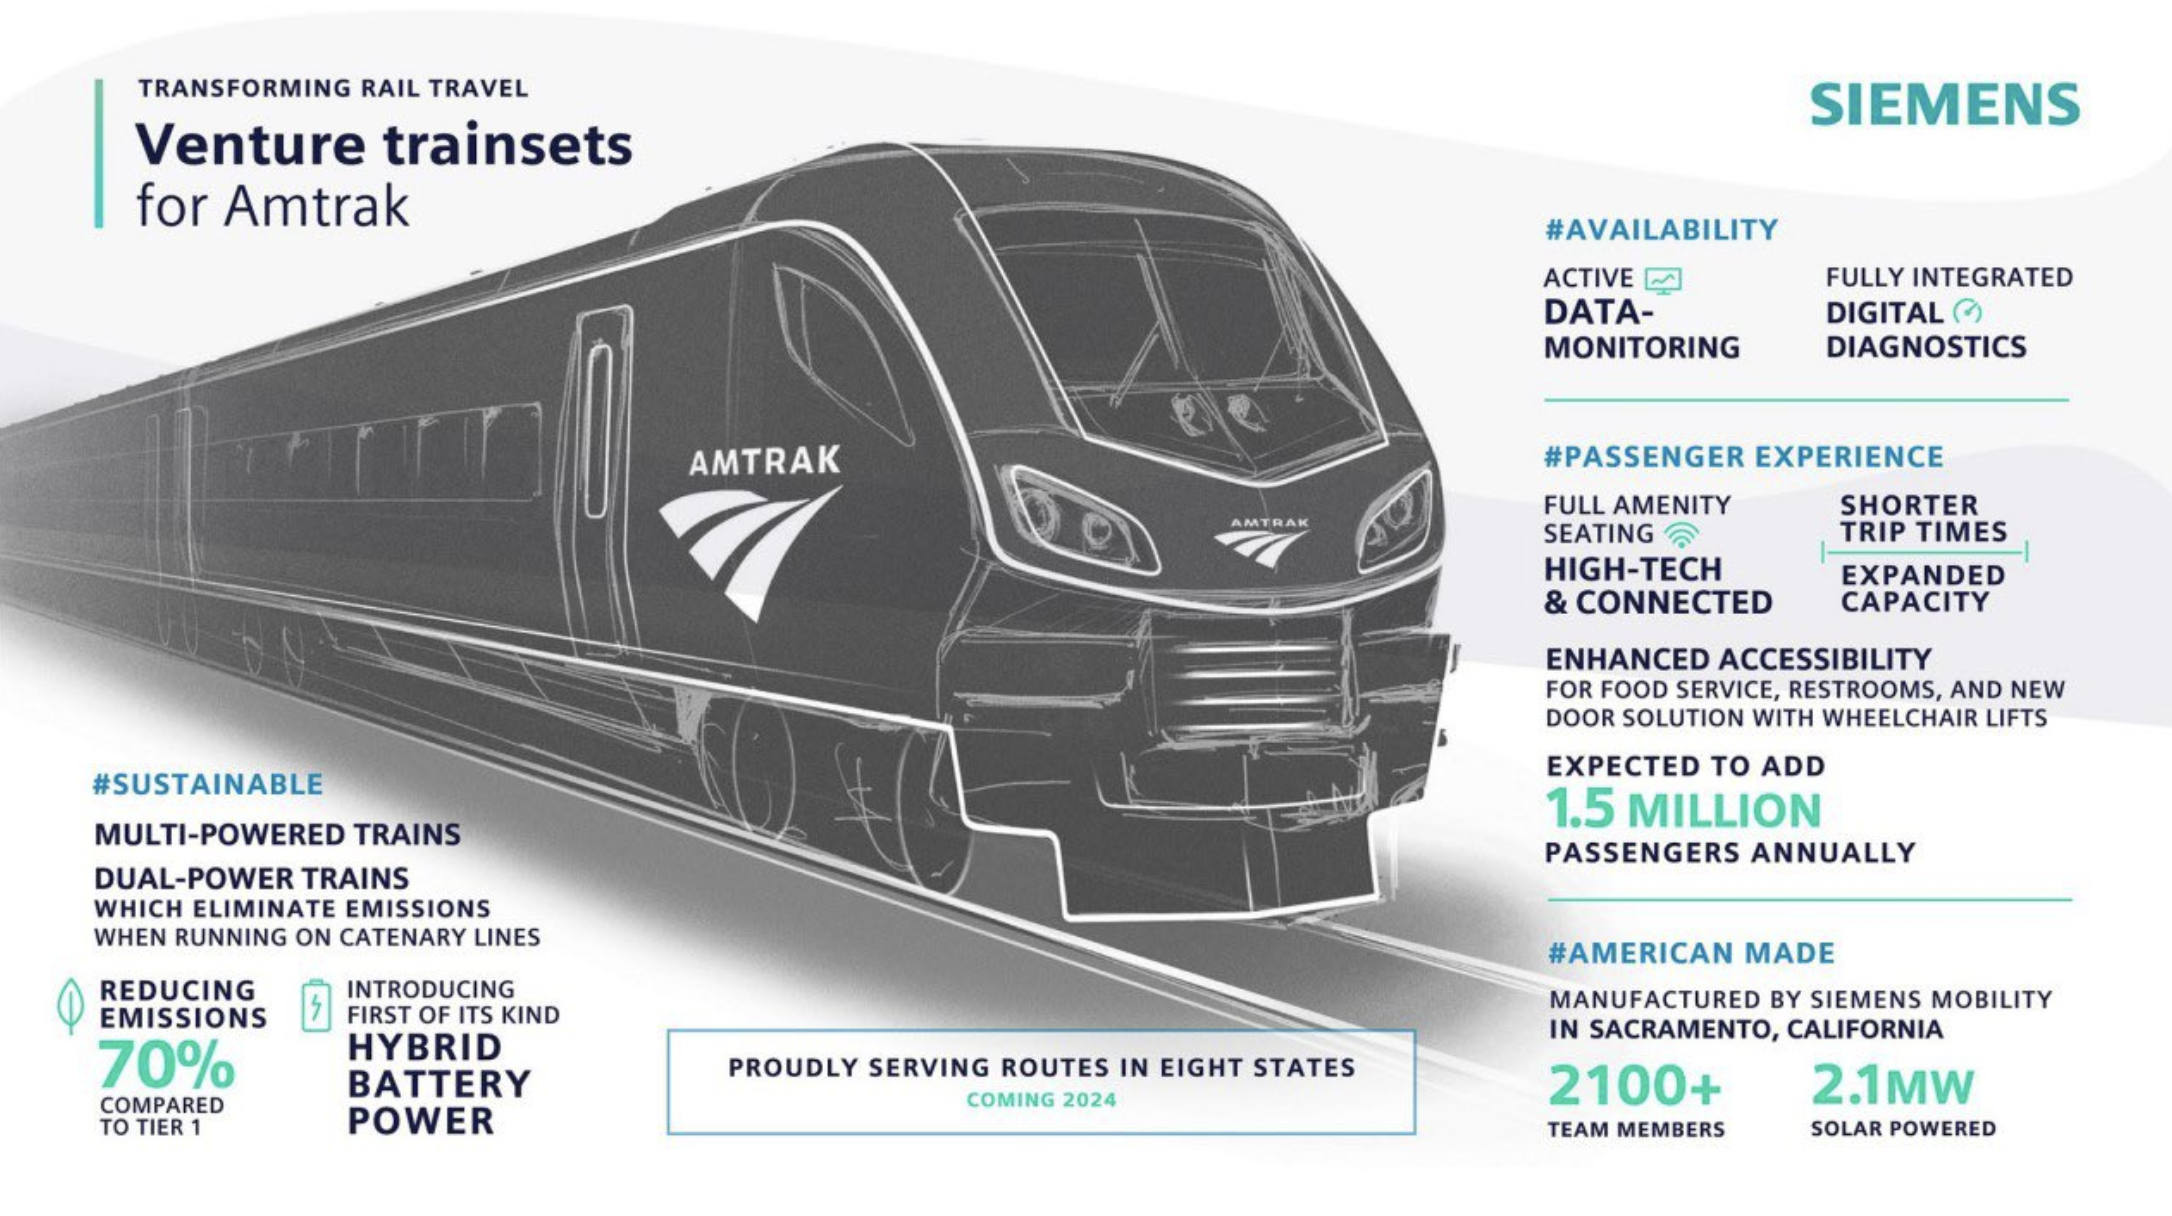 Amtrak Cuts Deal with Siemens for 'Venture' Trainsets, Replacing Cascades  Equipment | The Urbanist